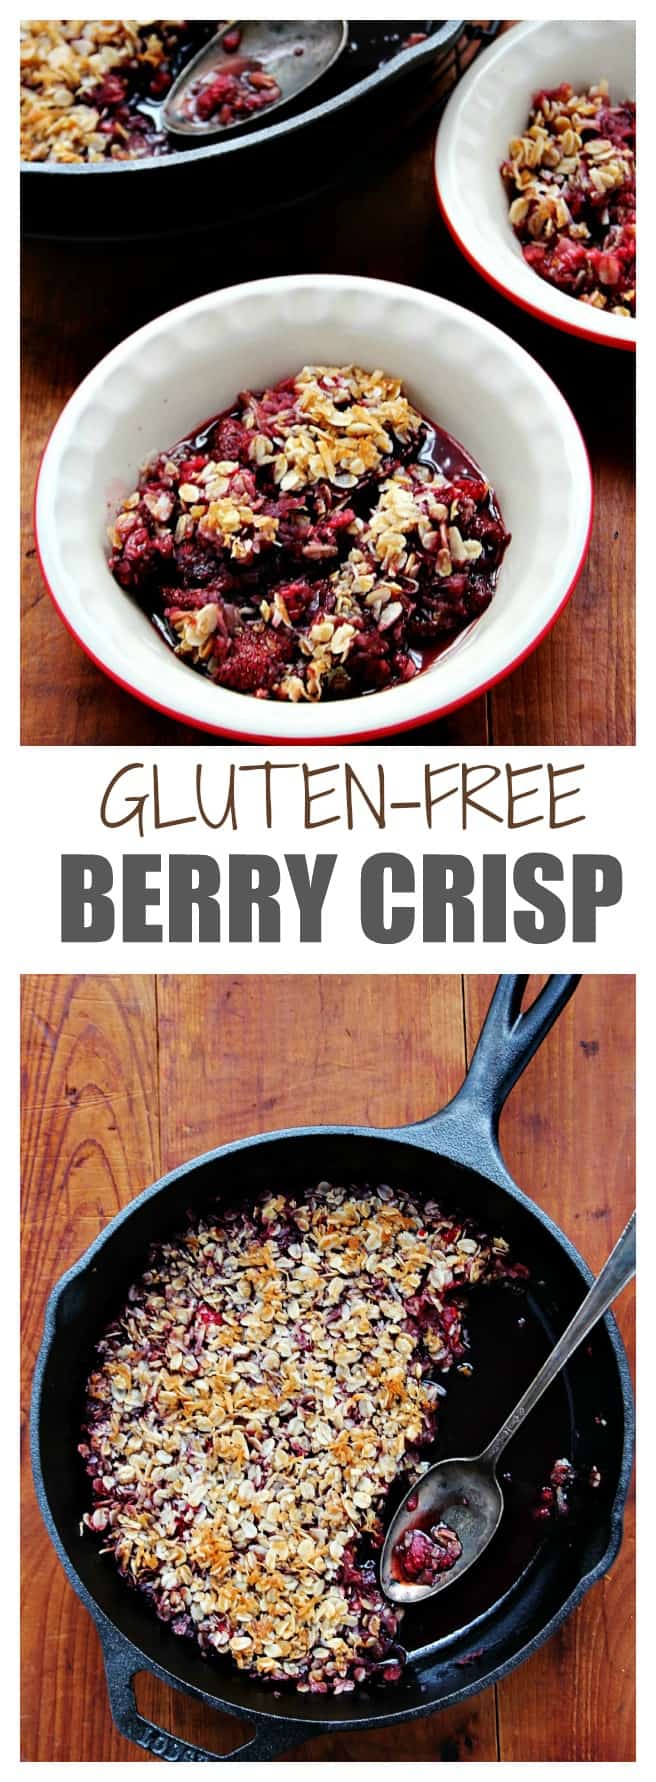 Gluten-Free Berry Crisp - super easy and delicious dessert baked in a skillet. The coconut-oat topping is crazy good! crunchycreamysweet.com